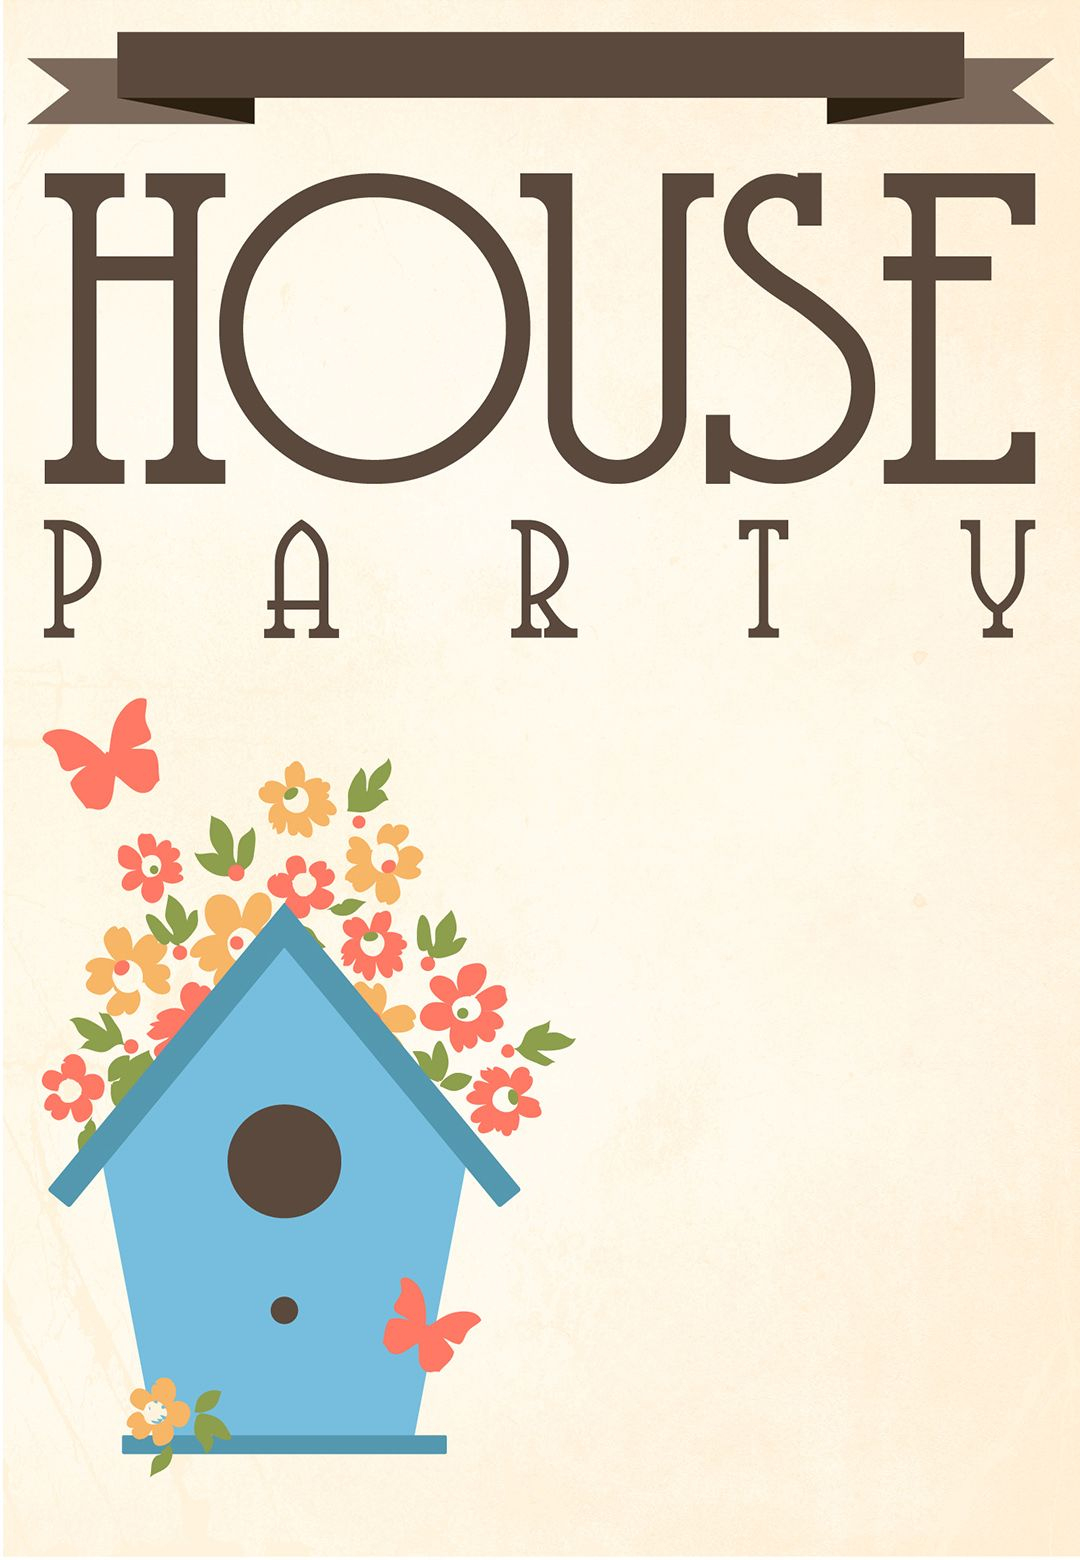 Free Printable House Party Invitation | Fonts/printables/templates - Free Printable Housewarming Invitations Cards